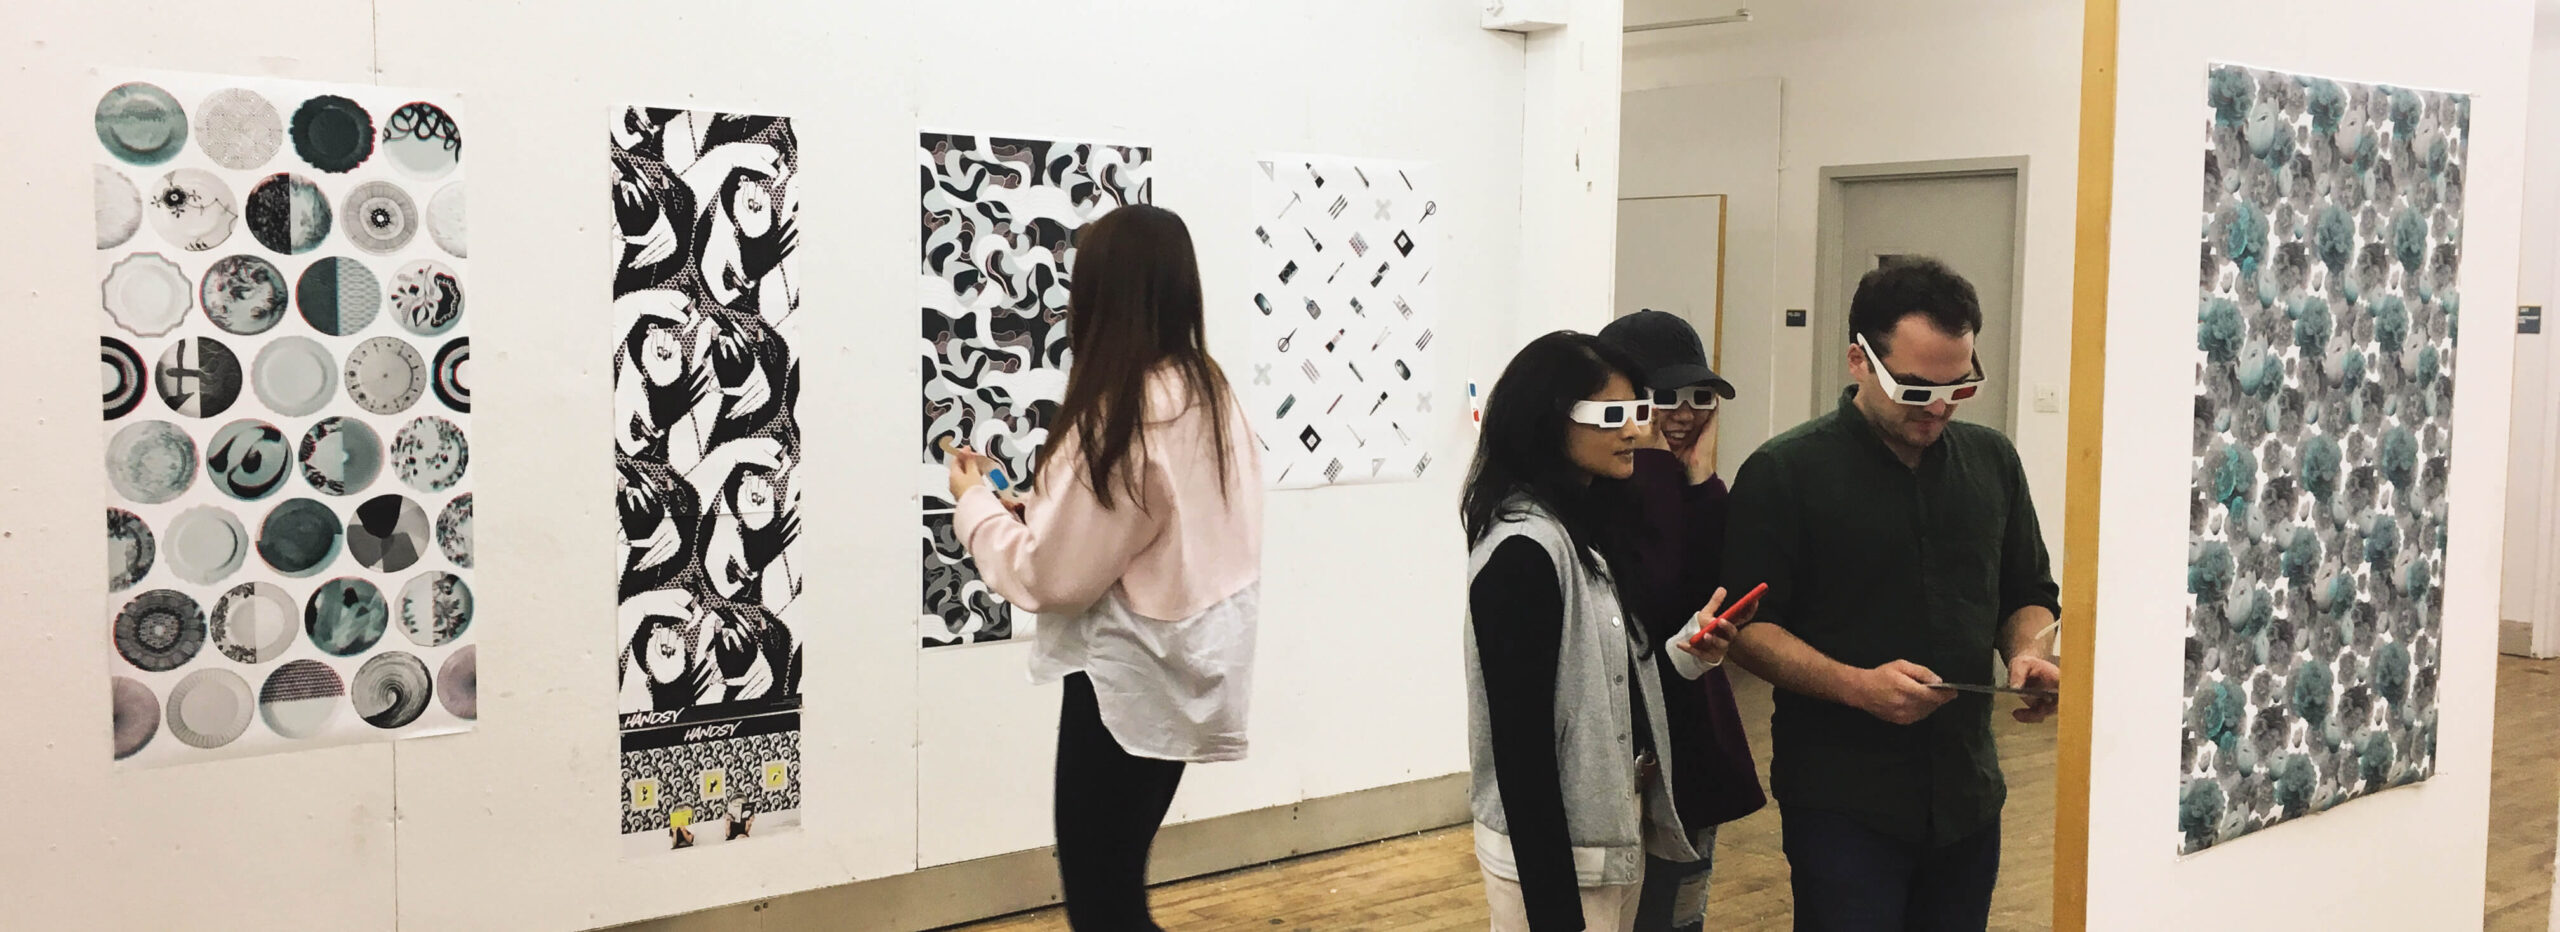 A group of people wearing 3D glasses at an art gallery look at art hung on white walls.